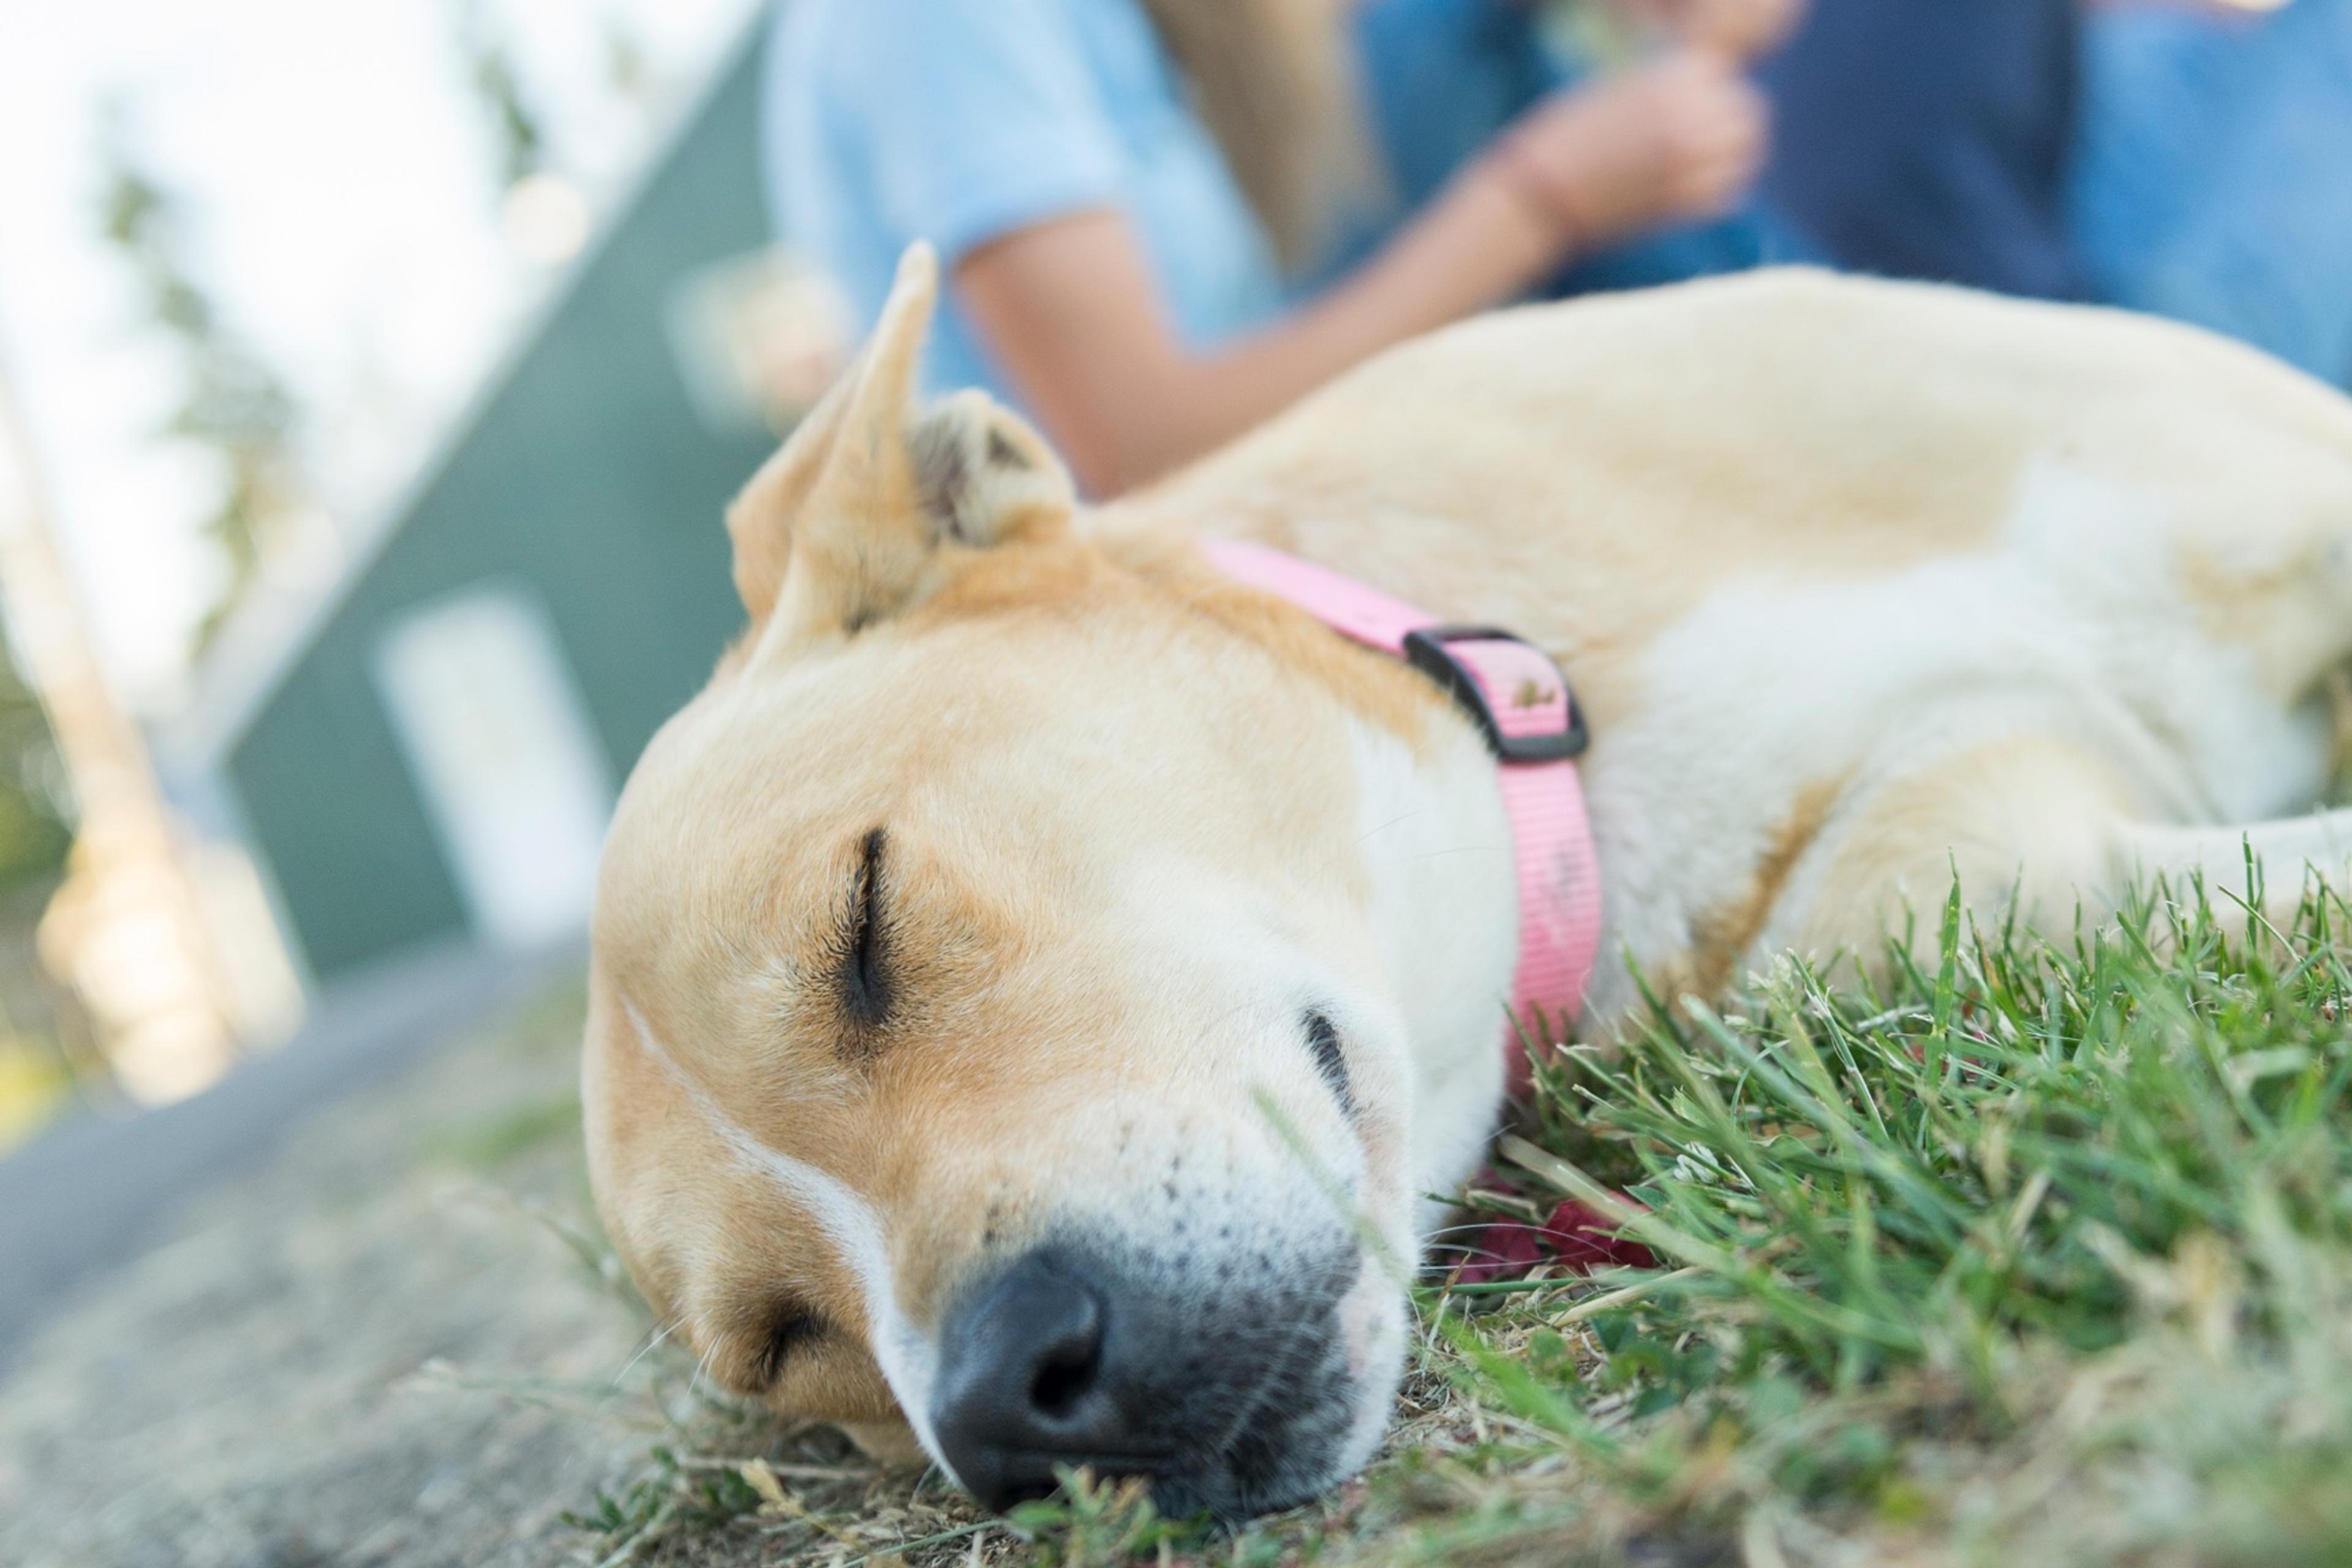 A yellow lab with a pink collar naps in the grass.